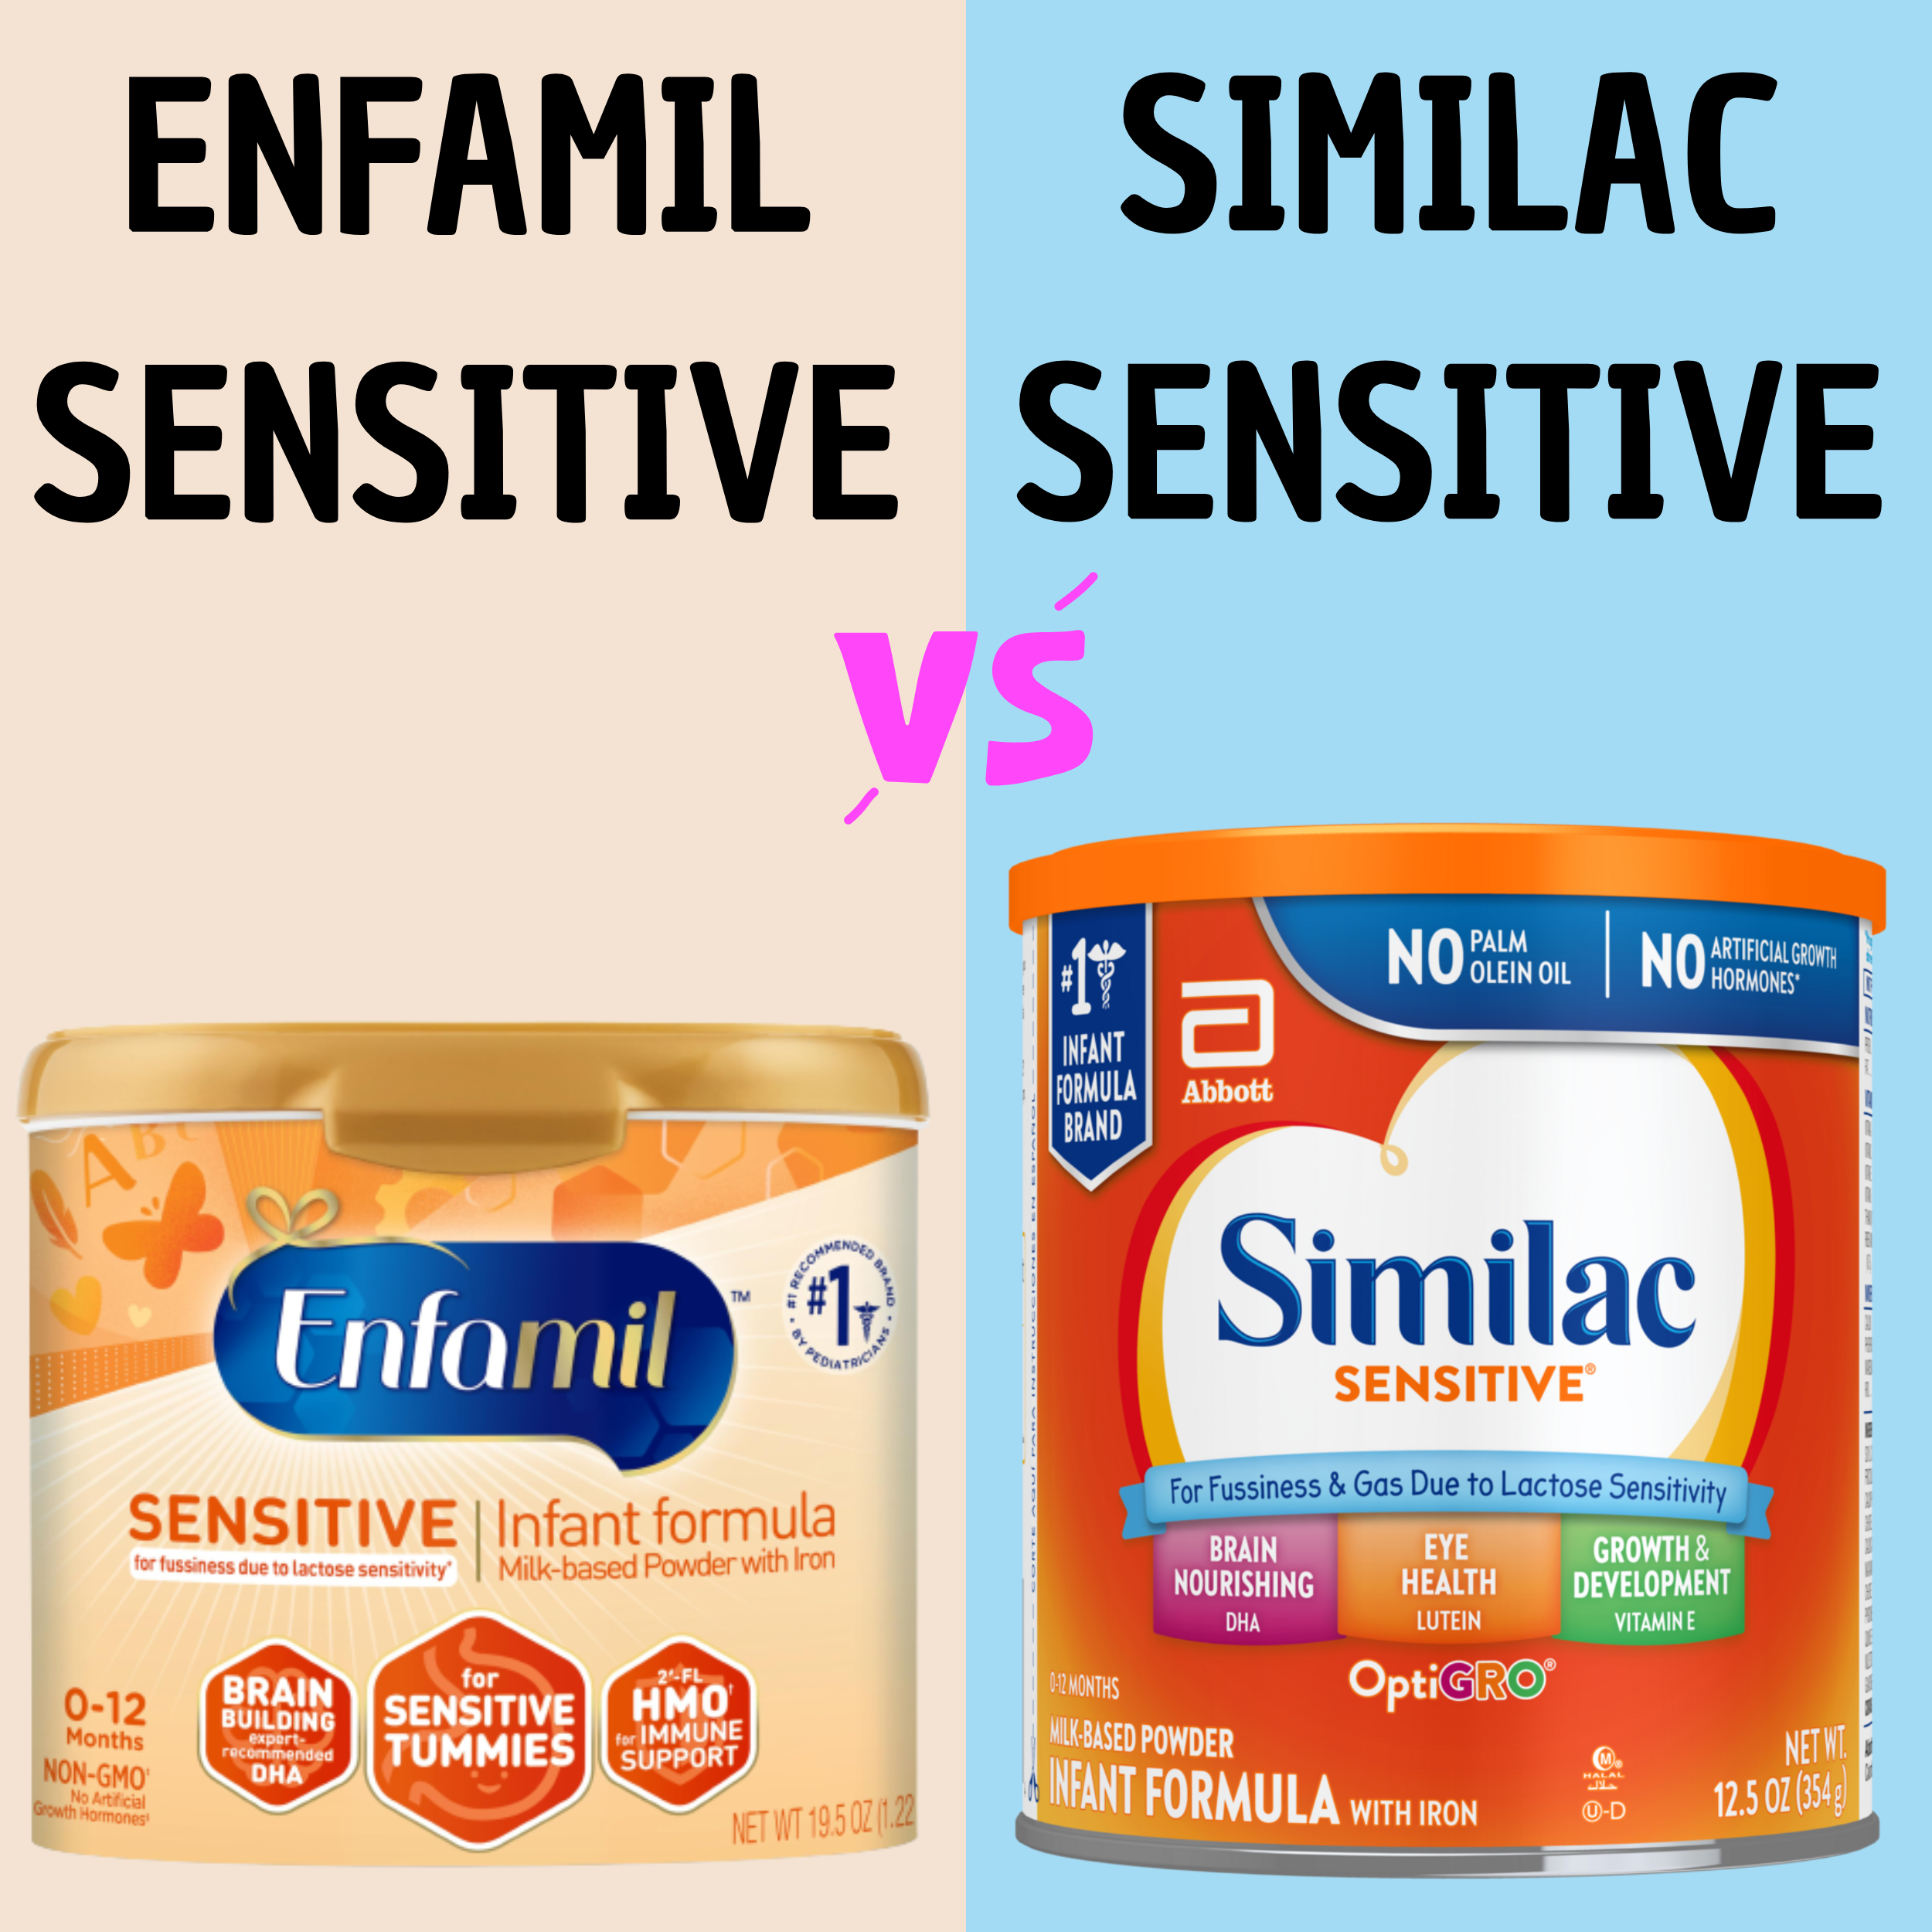 You are currently viewing Enfamil Sensitive Vs Similac Sensitive: Which One is The Best?